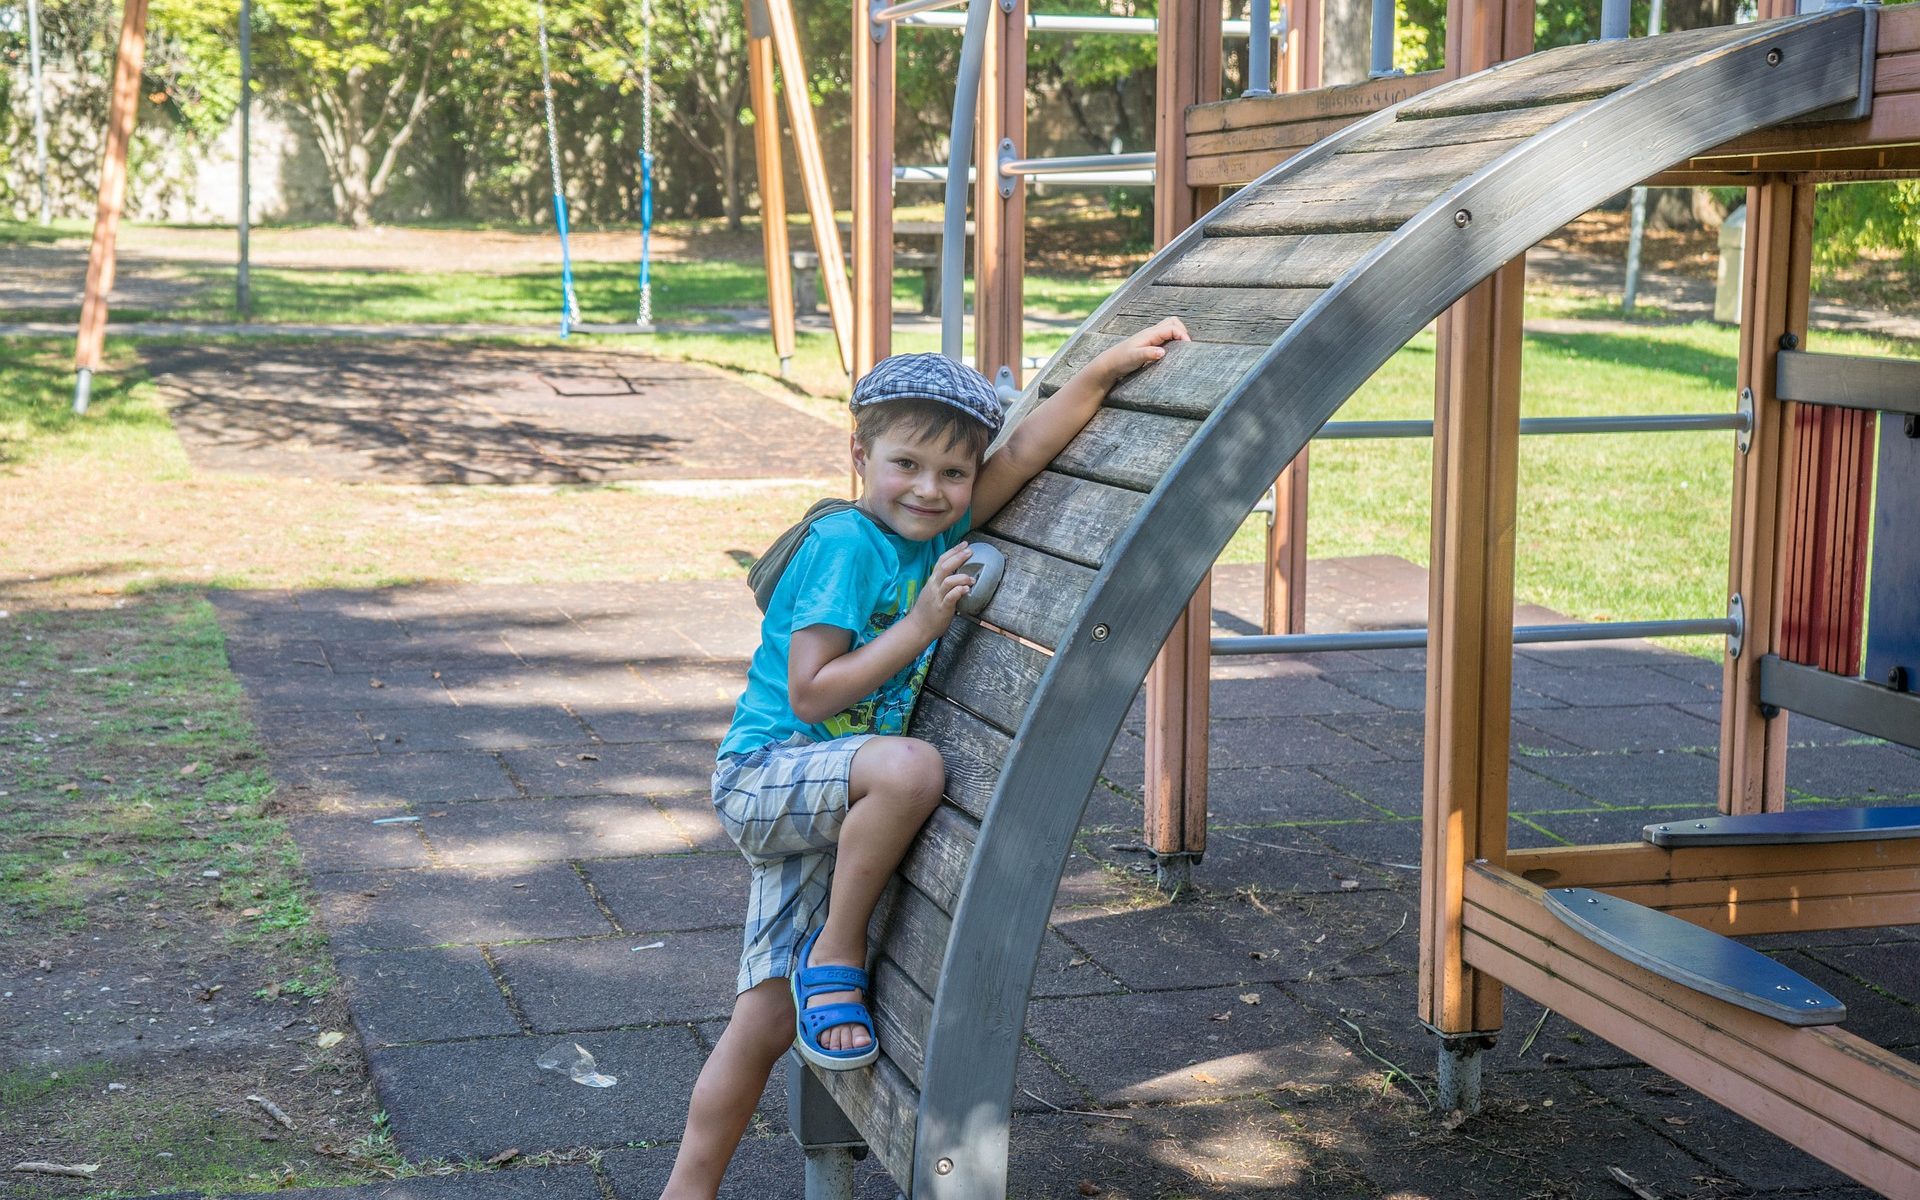 Young boy climbs on a playground.